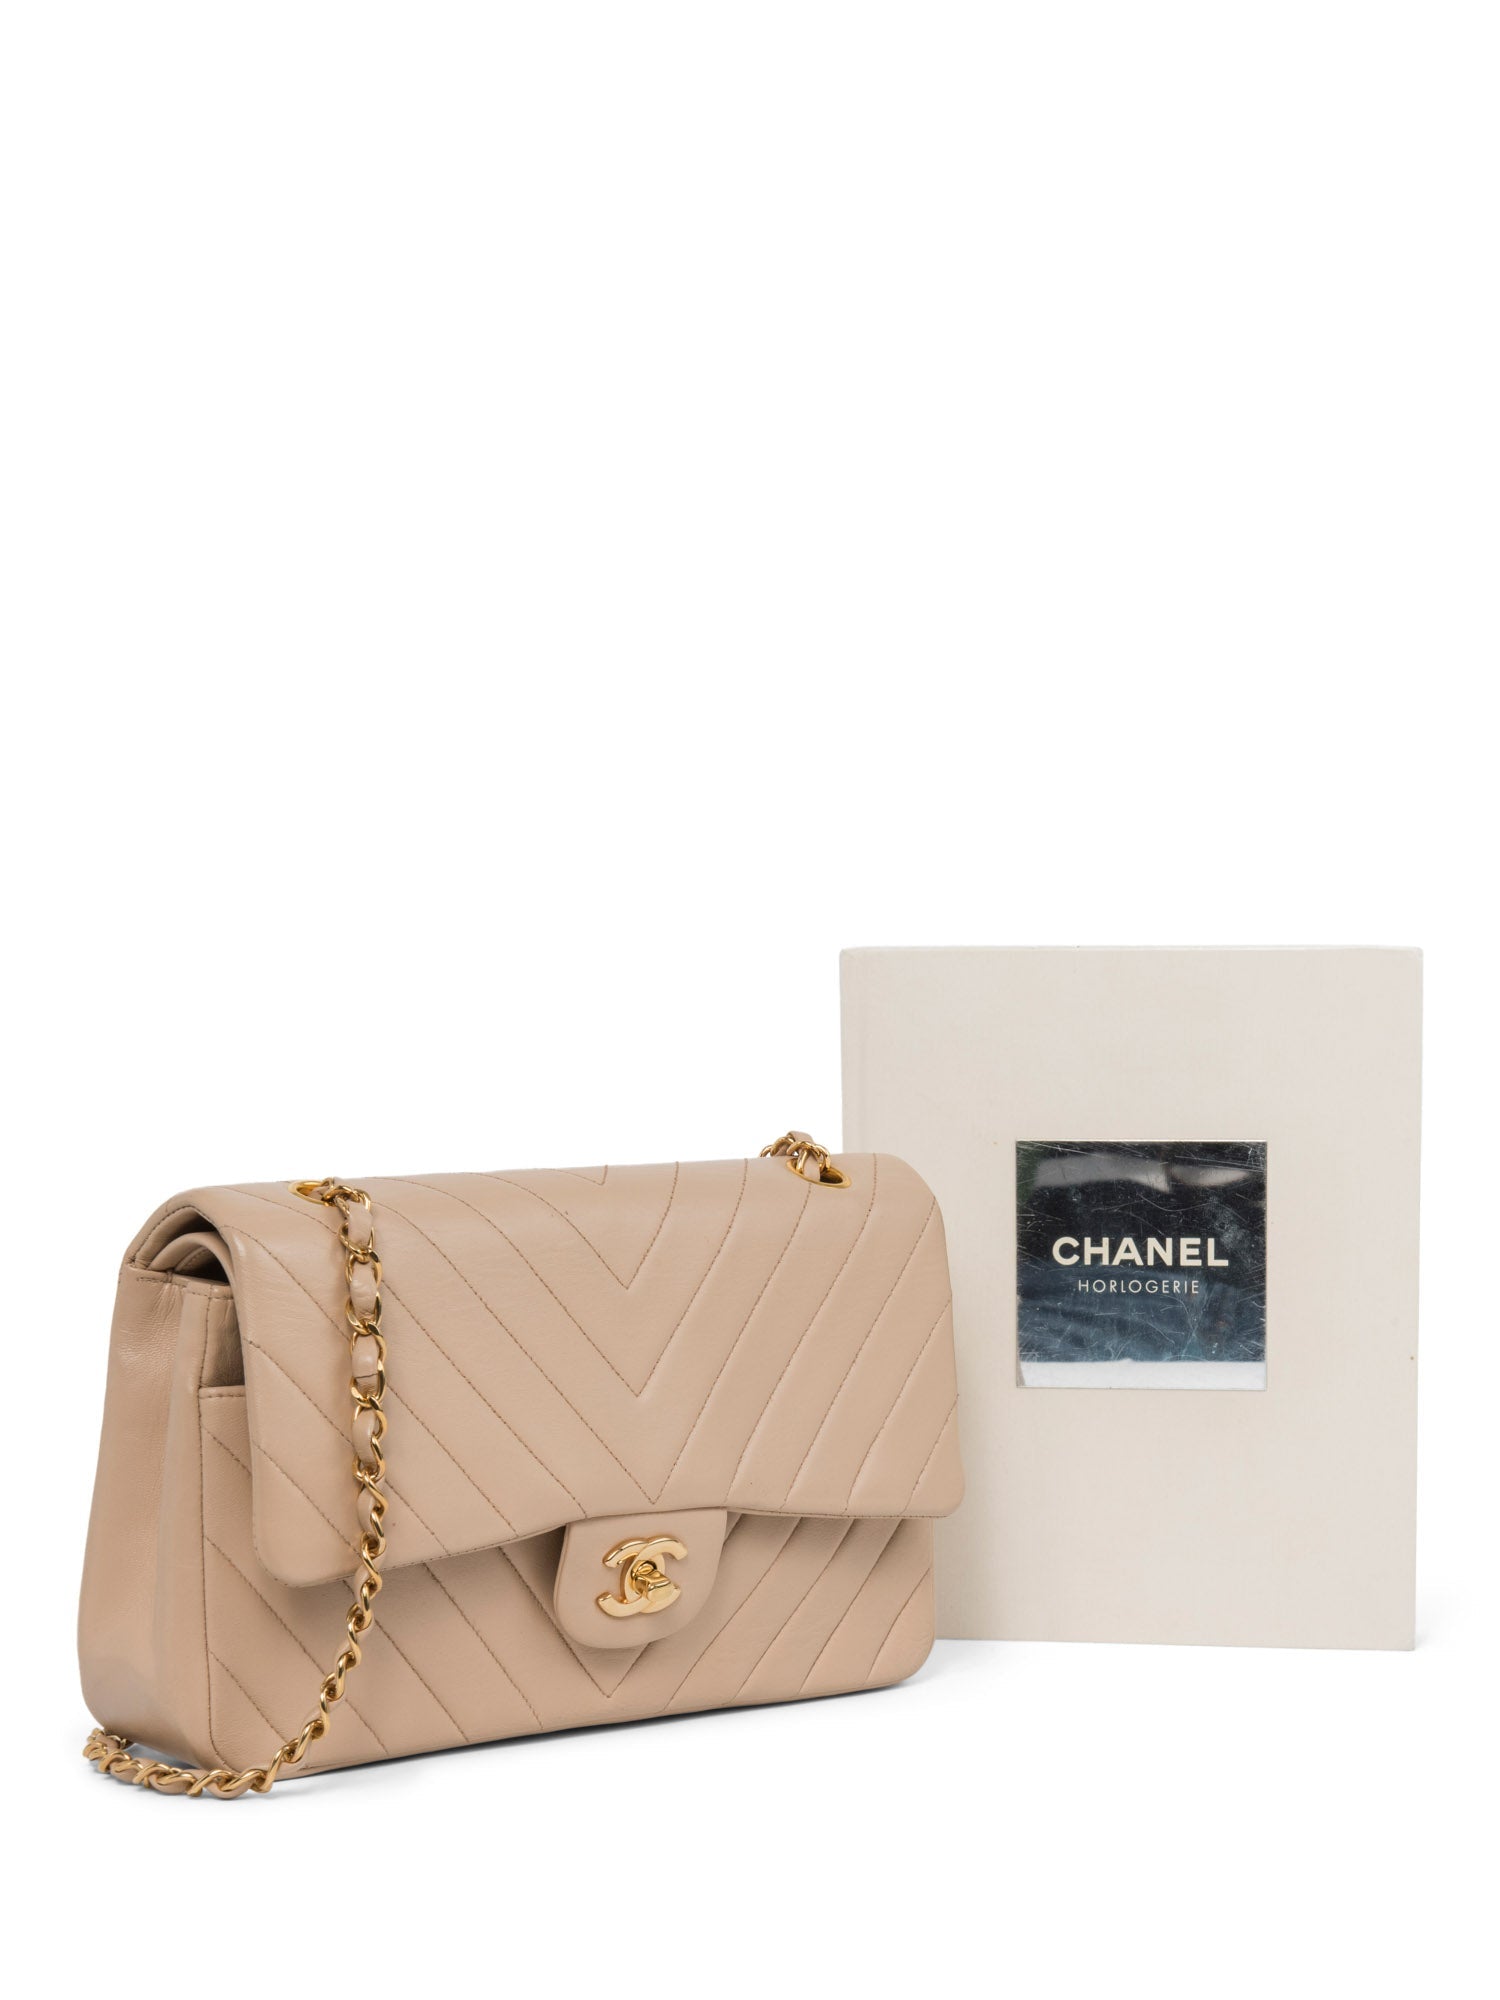 Unlocking the Mystery of Chanel Classic Flap Bag Sizes: Find Your Perfect  Fit!